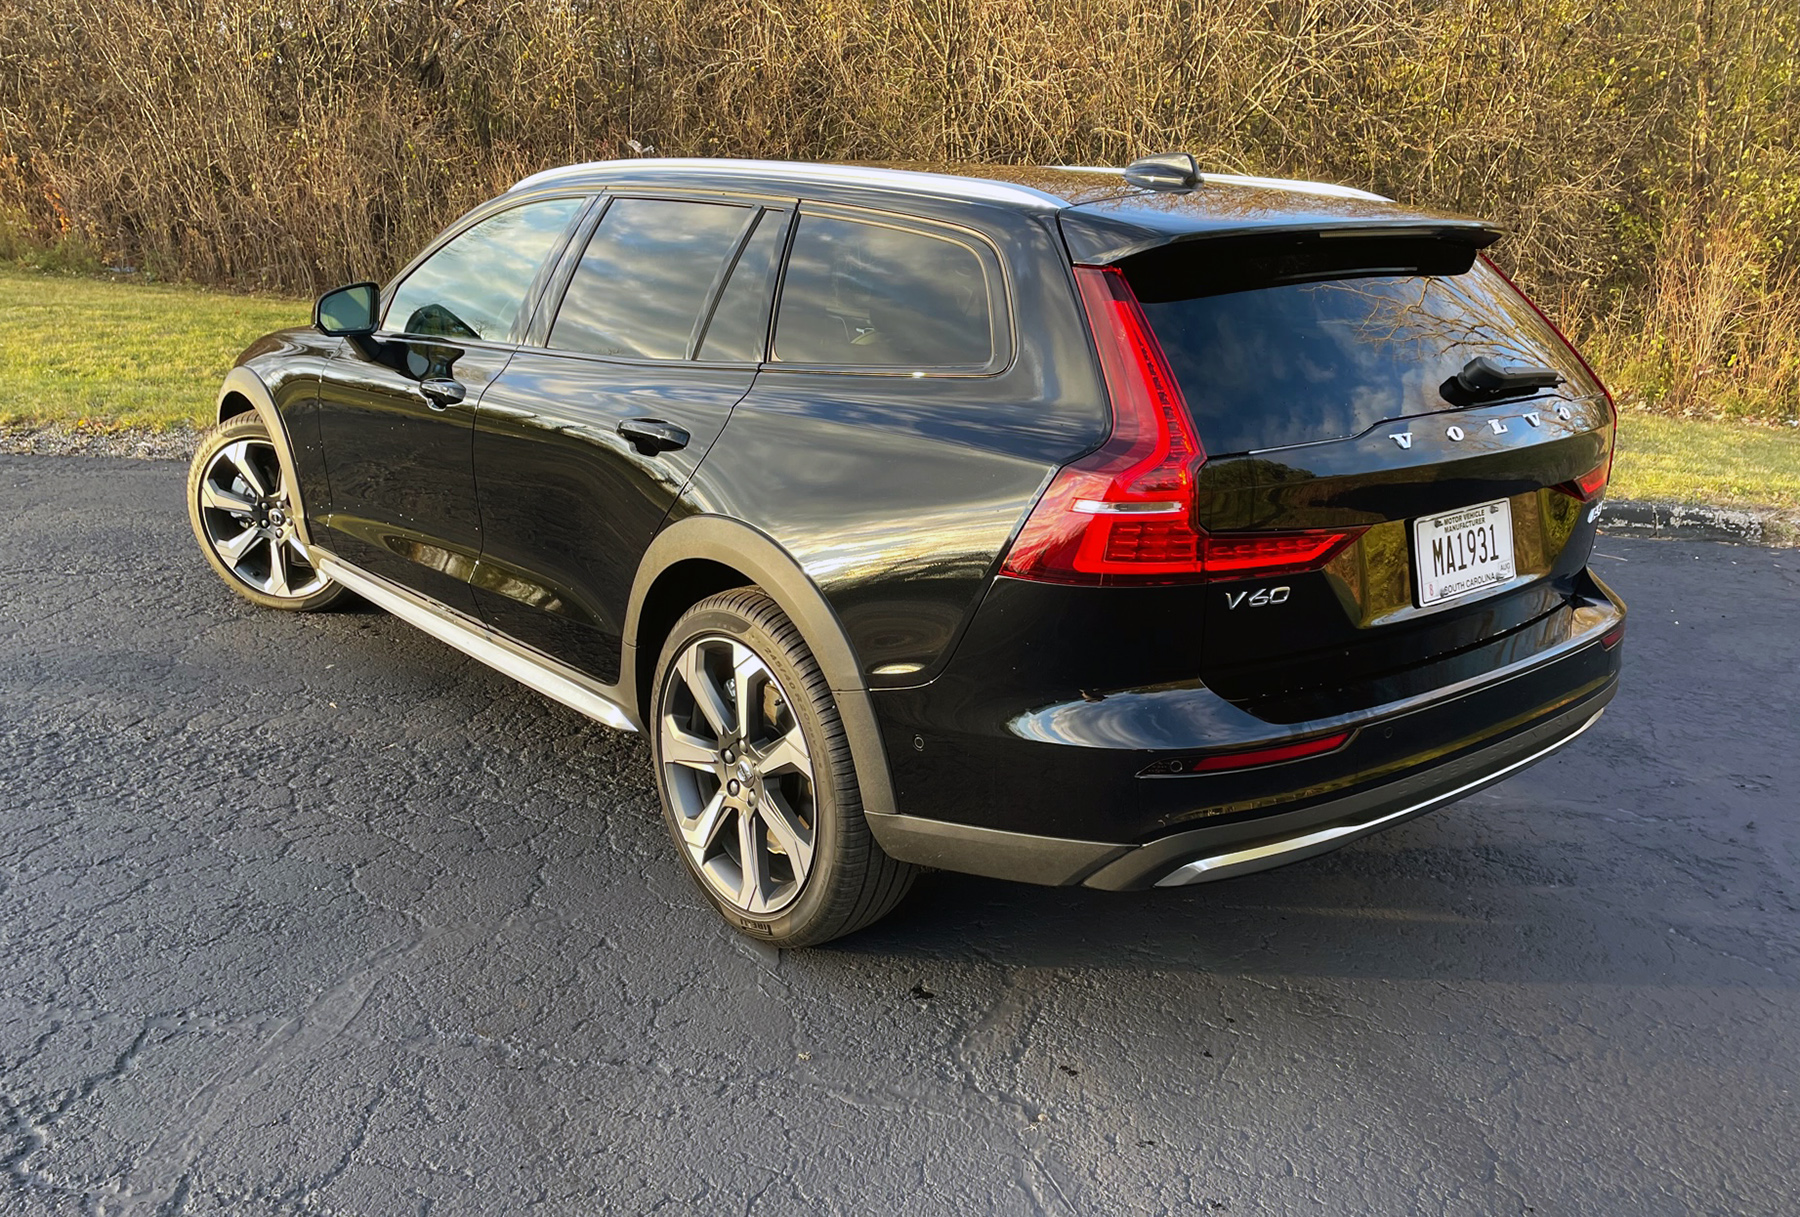 The 2023 Volvo V60 Cross Country modern day station wagon of yesteryear.